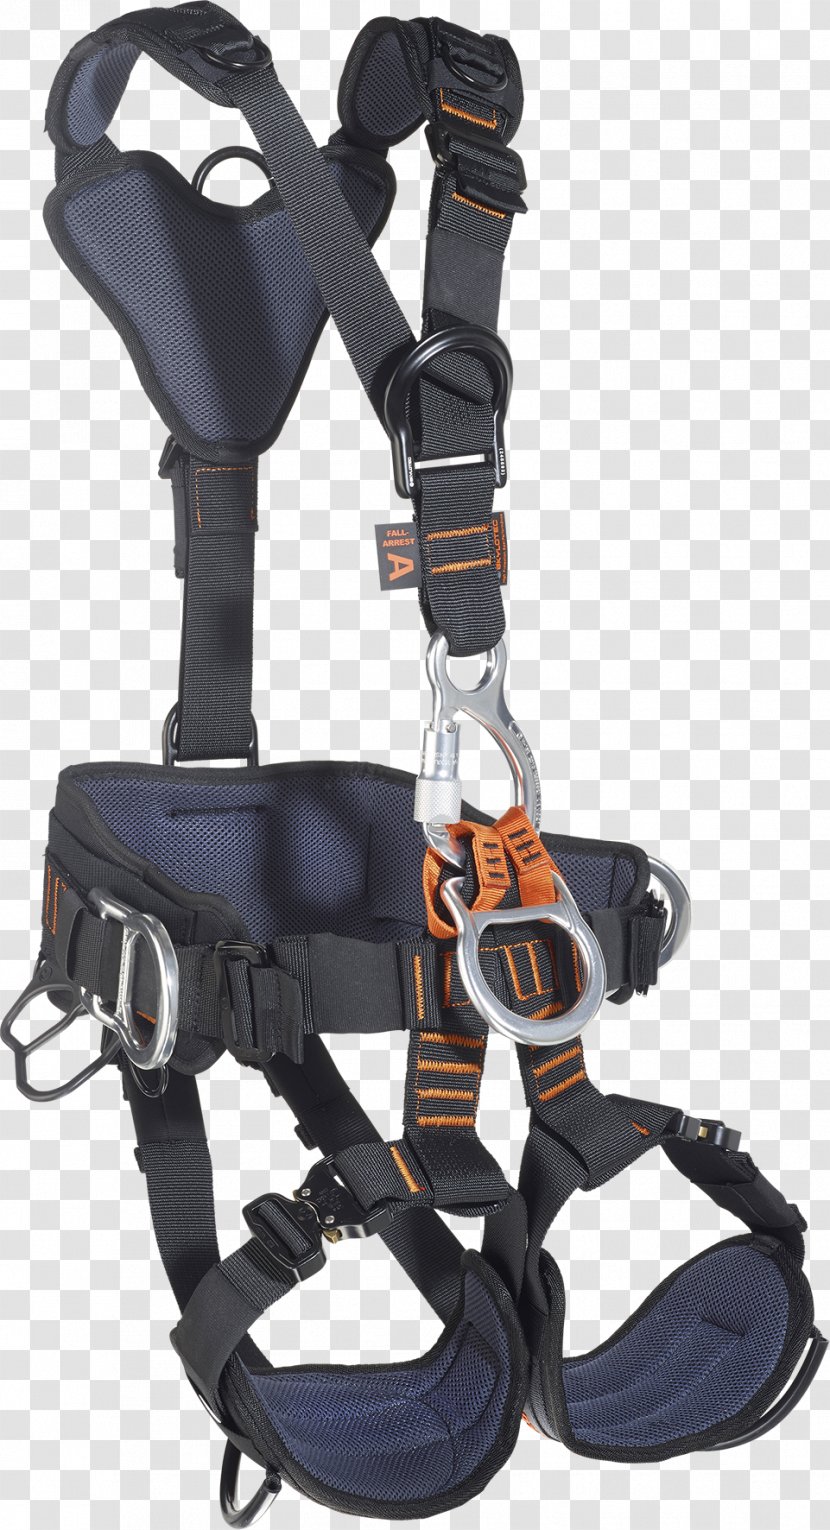 Climbing Harnesses Rope Access Safety Harness Rescue Transparent PNG